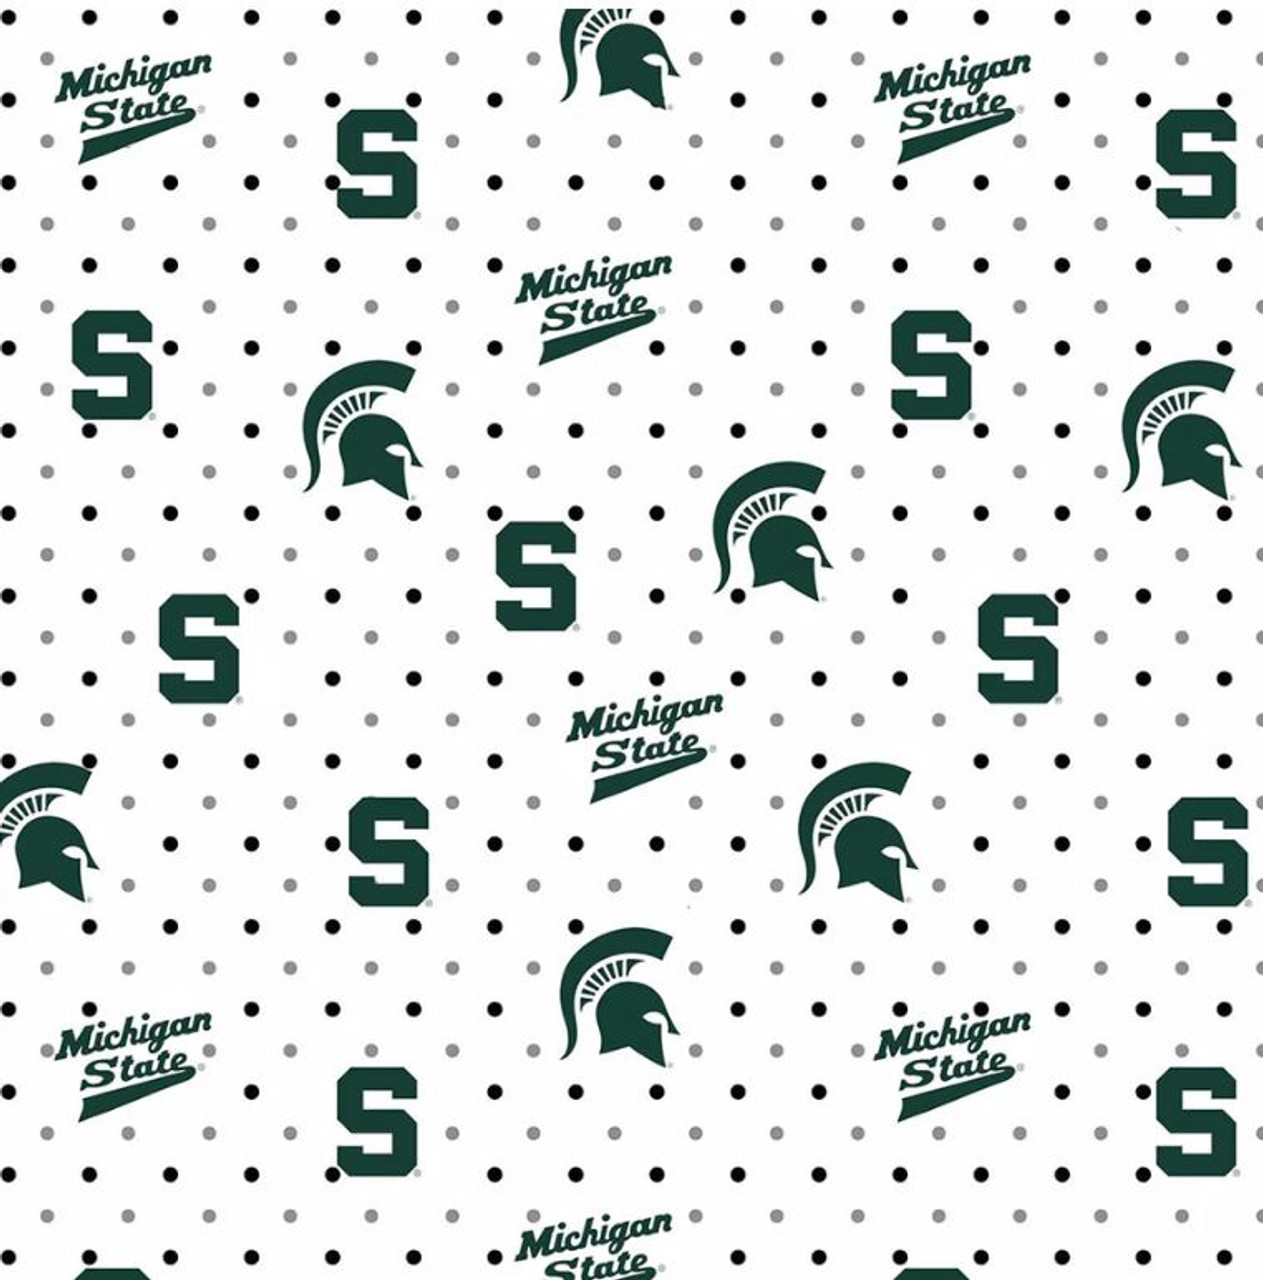 Michigan State University Spartans Cotton Fabric with White Polka Dot Print or Matching Solid Cotton Fabrics